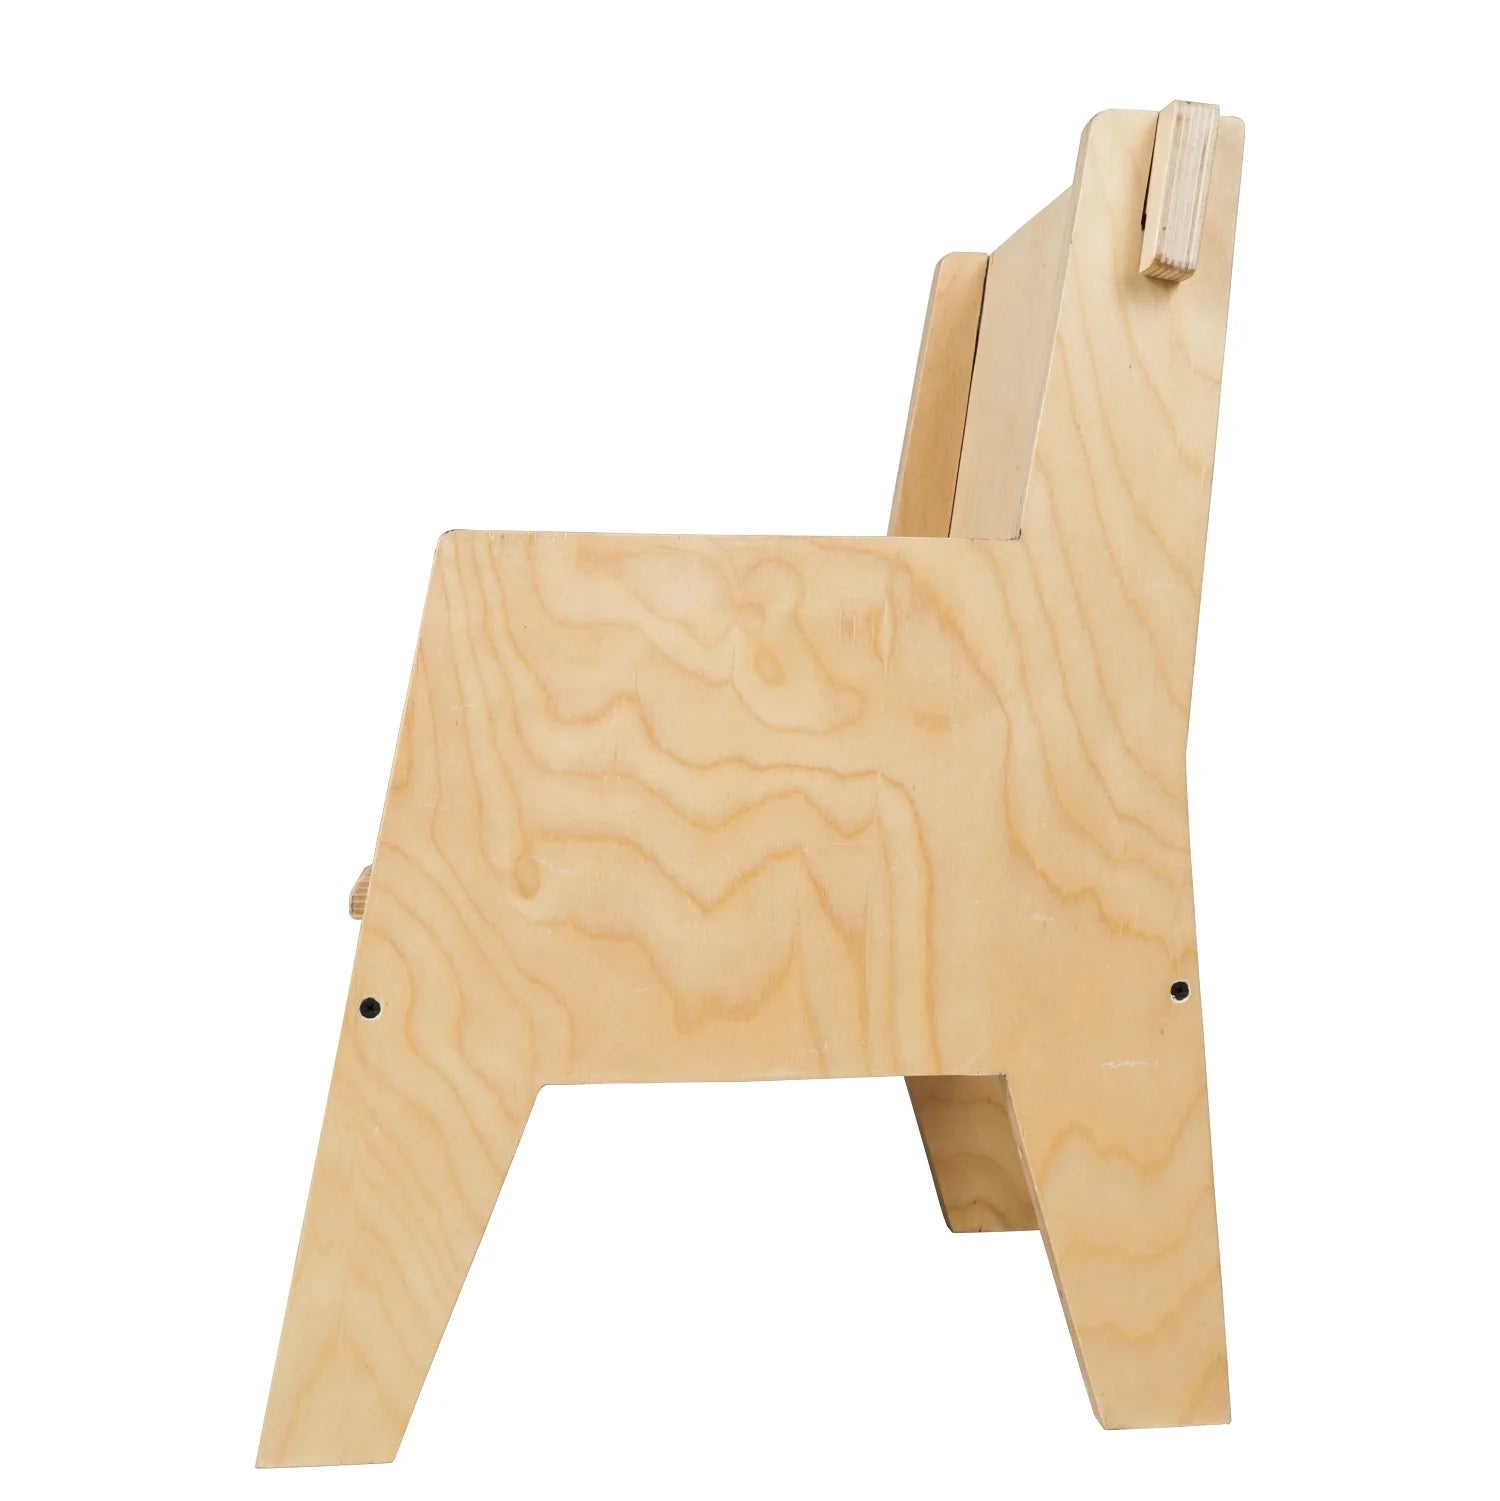 Buy Littles' Planet Montessori Wooden Arm Chair  - Position 2 - SkilloToys.com